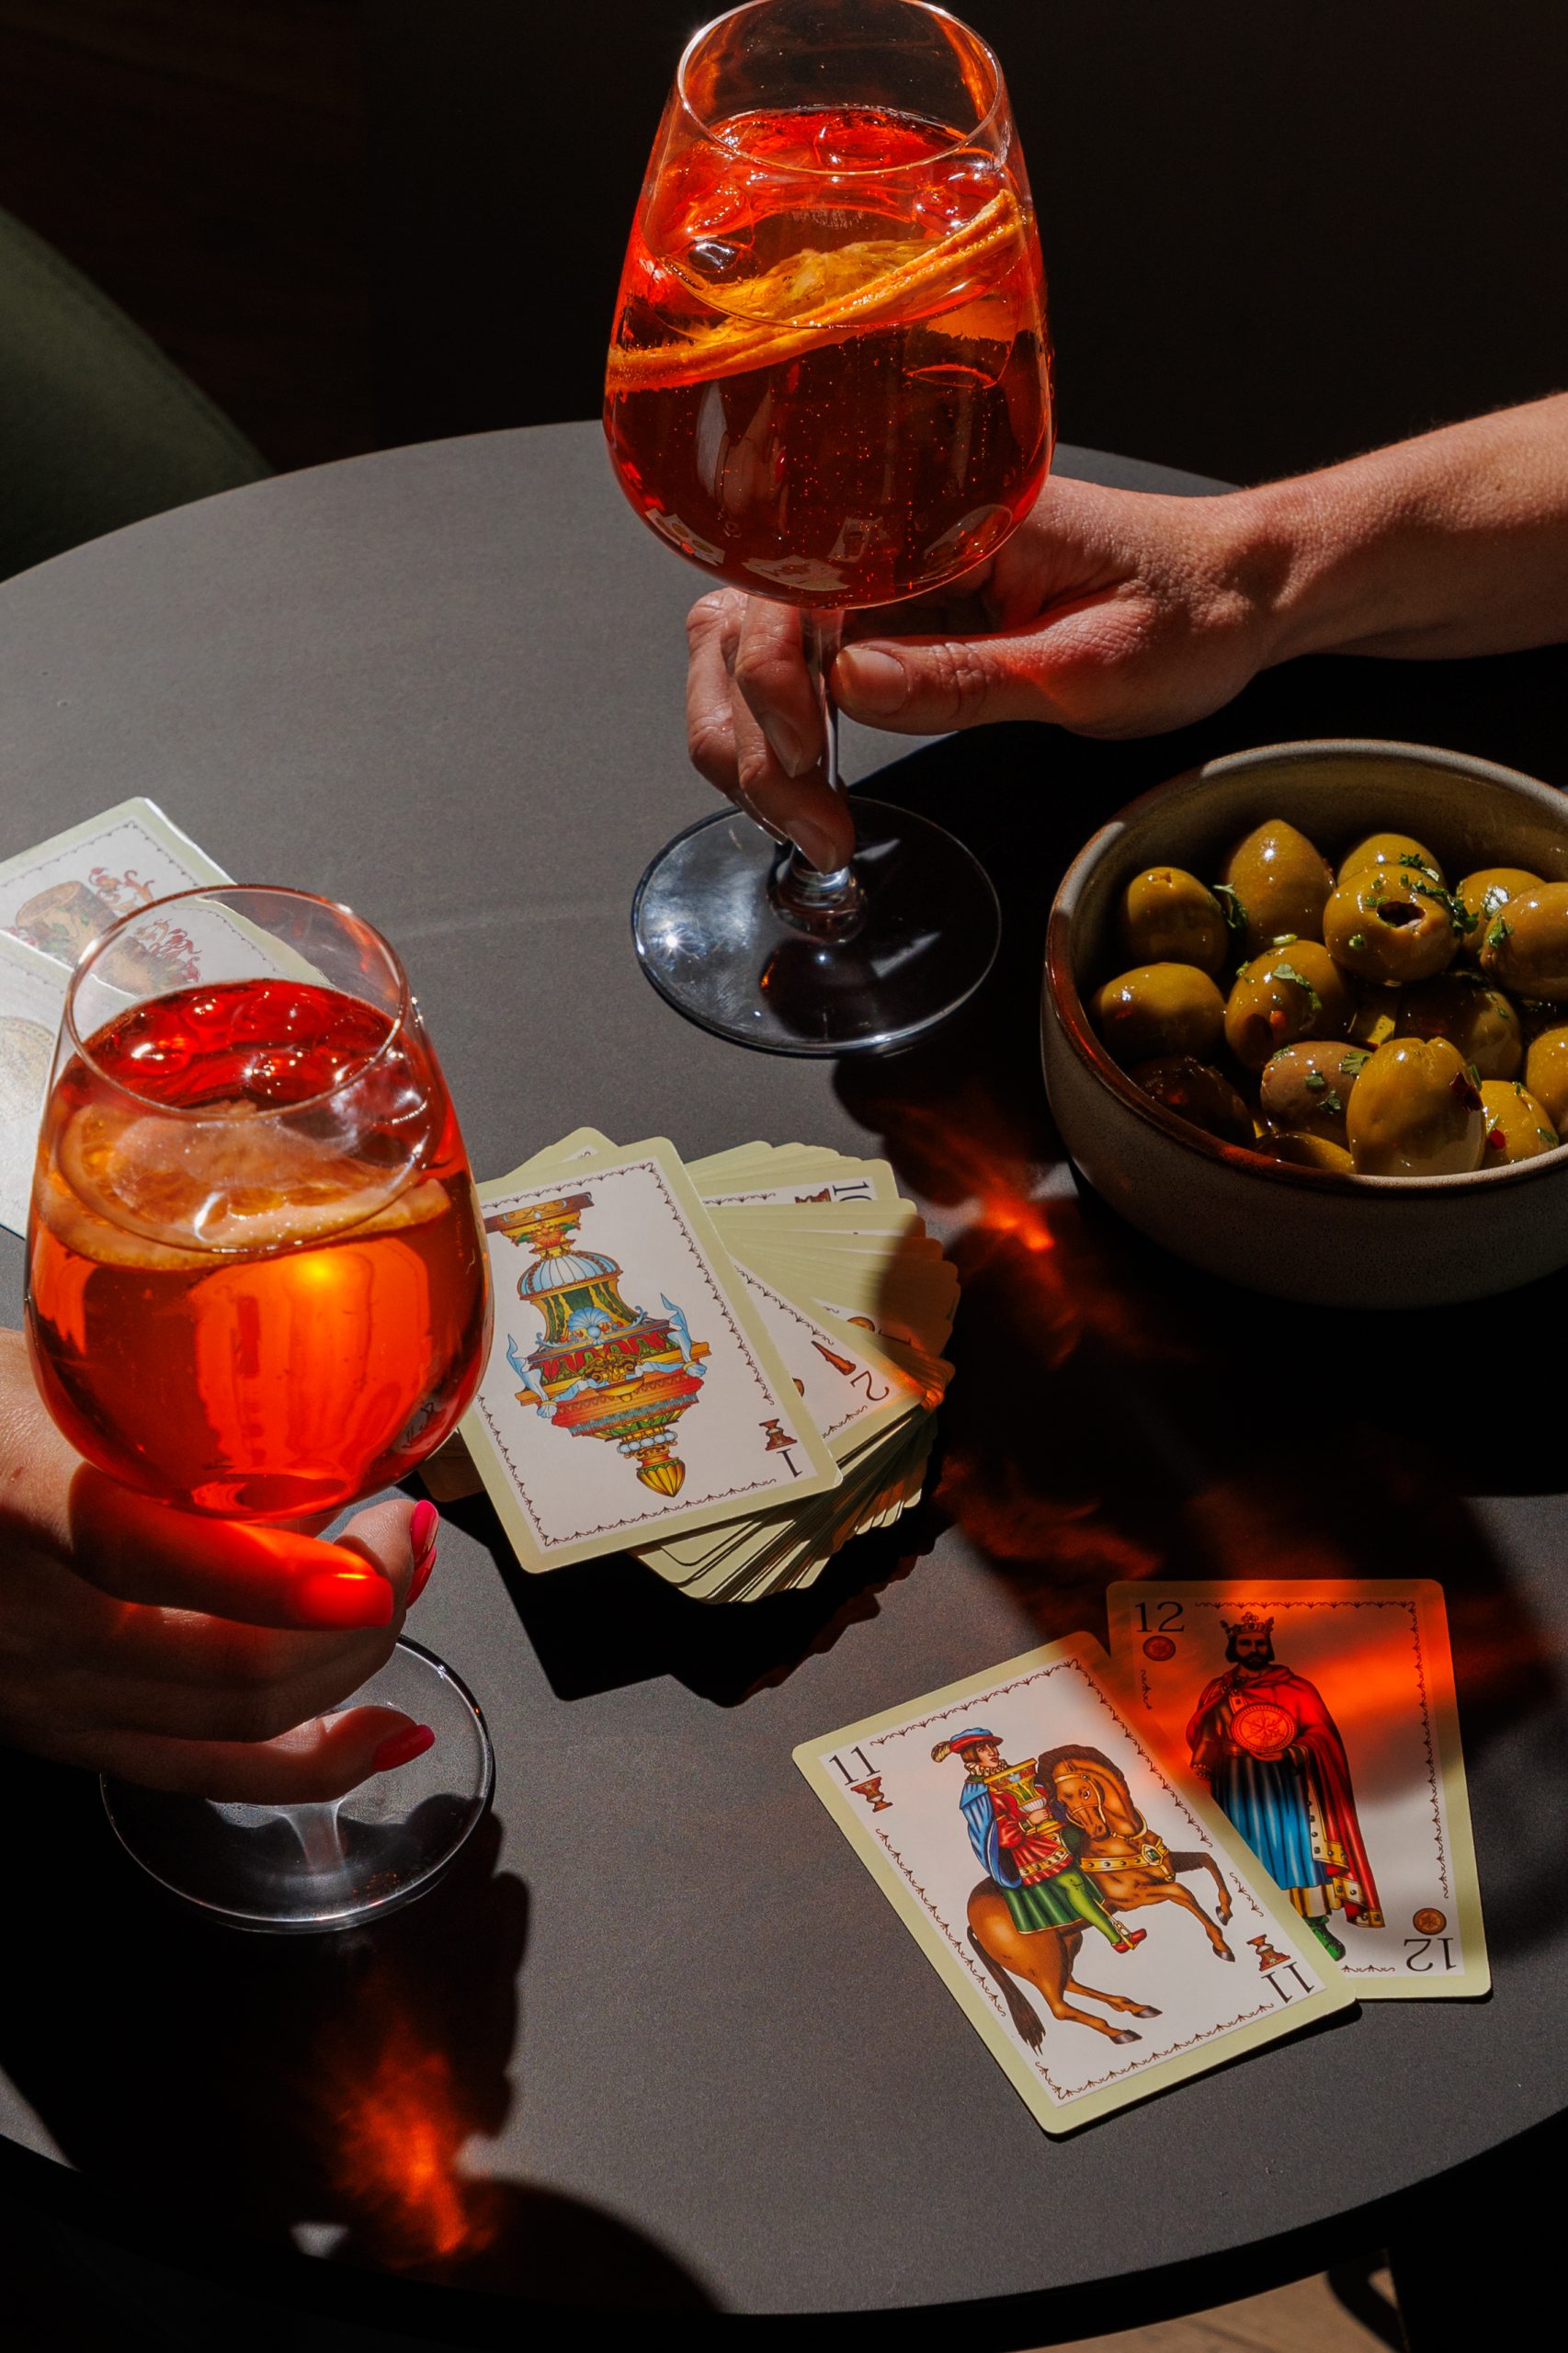 Aperol Spritz with olives and playing cards on a black table.